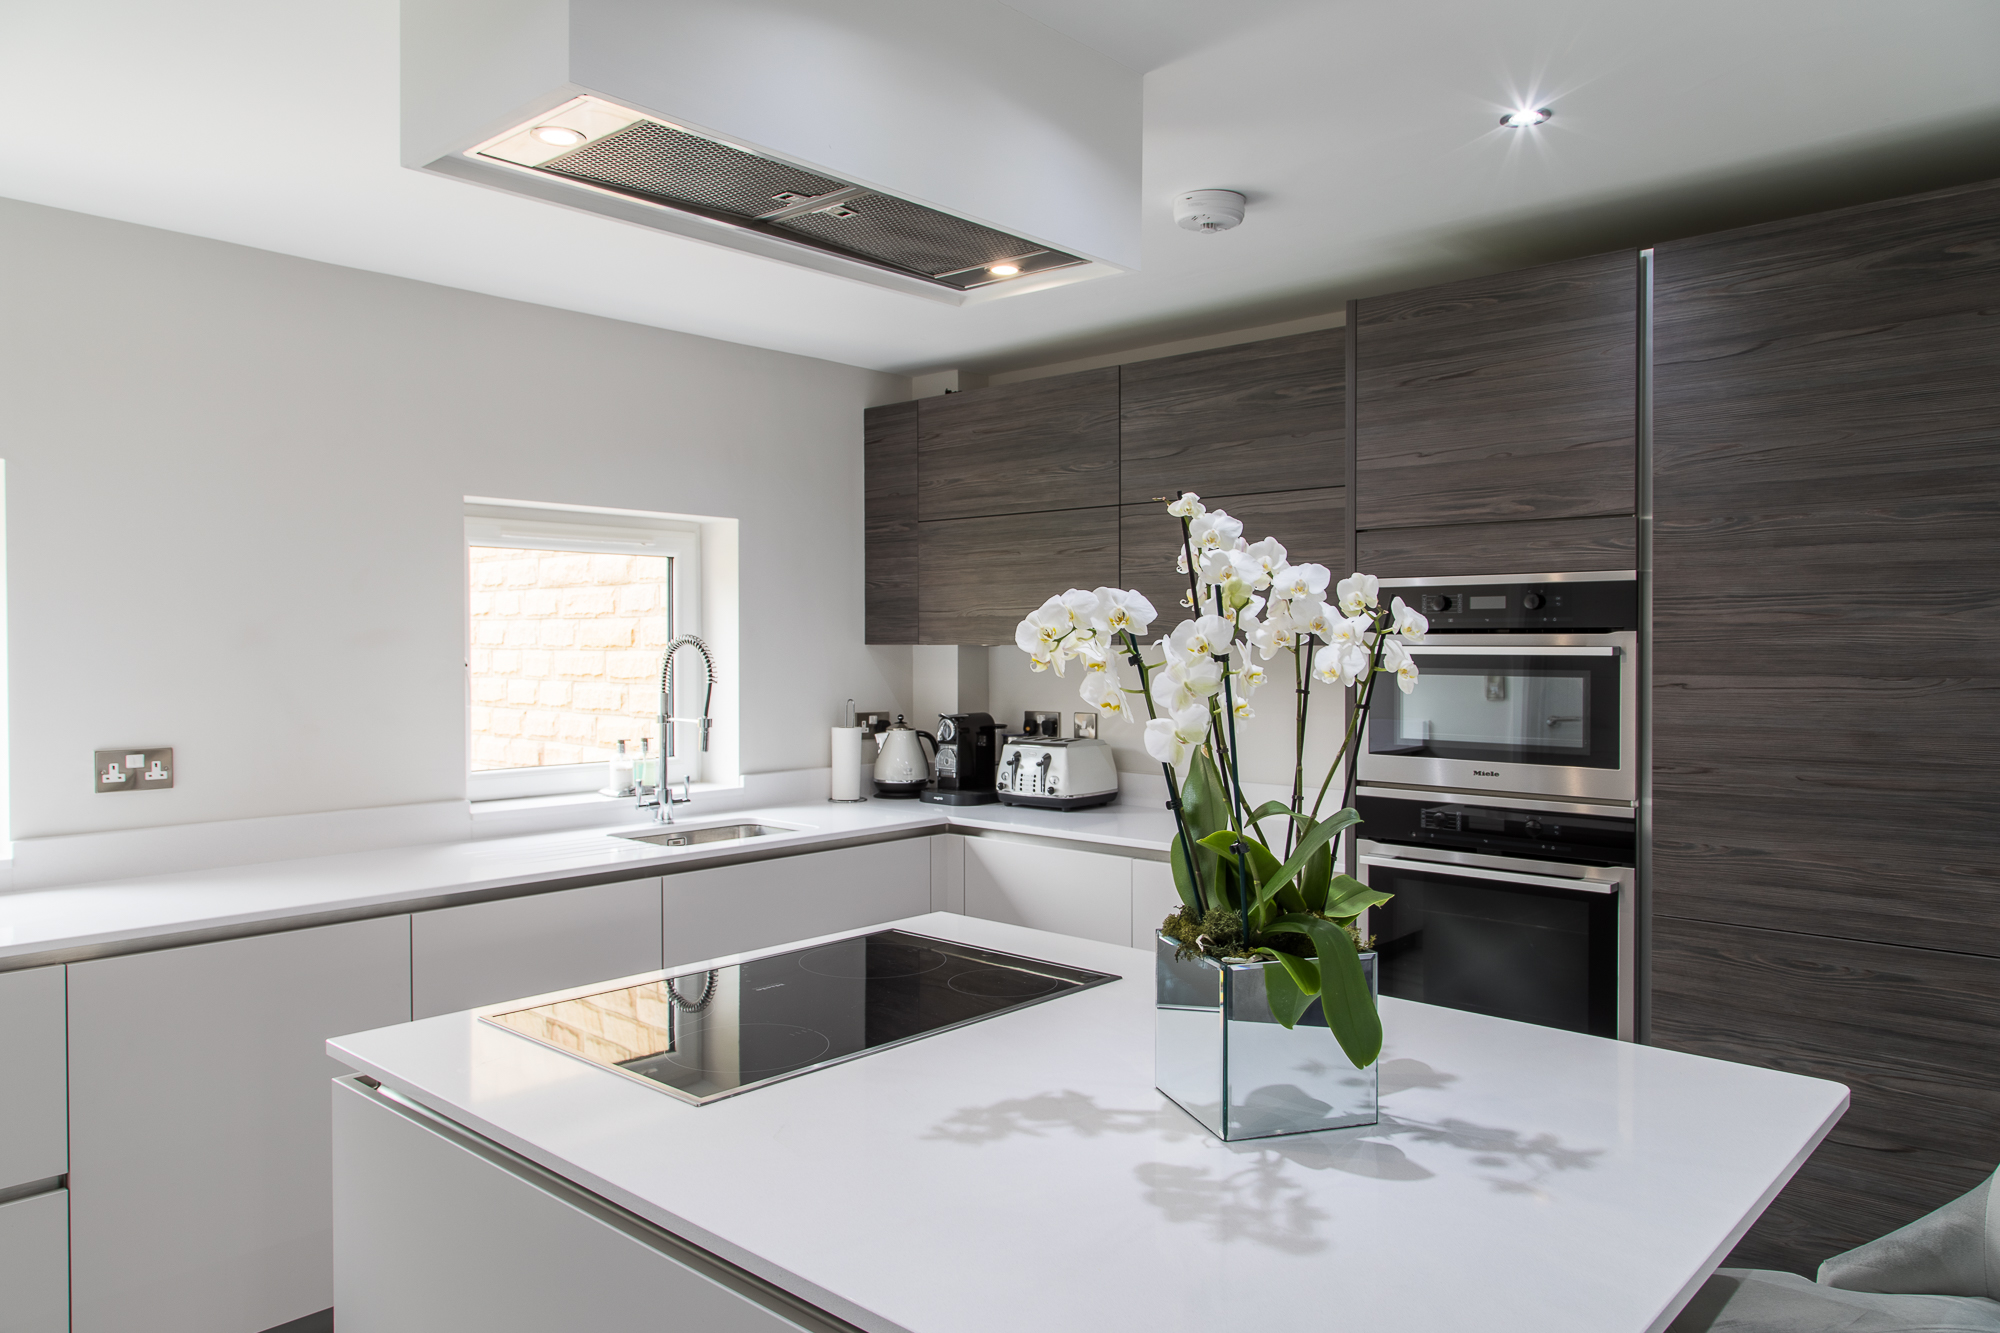 Modern German kitchens in Sheffield by industry experts, Concept Interiors.